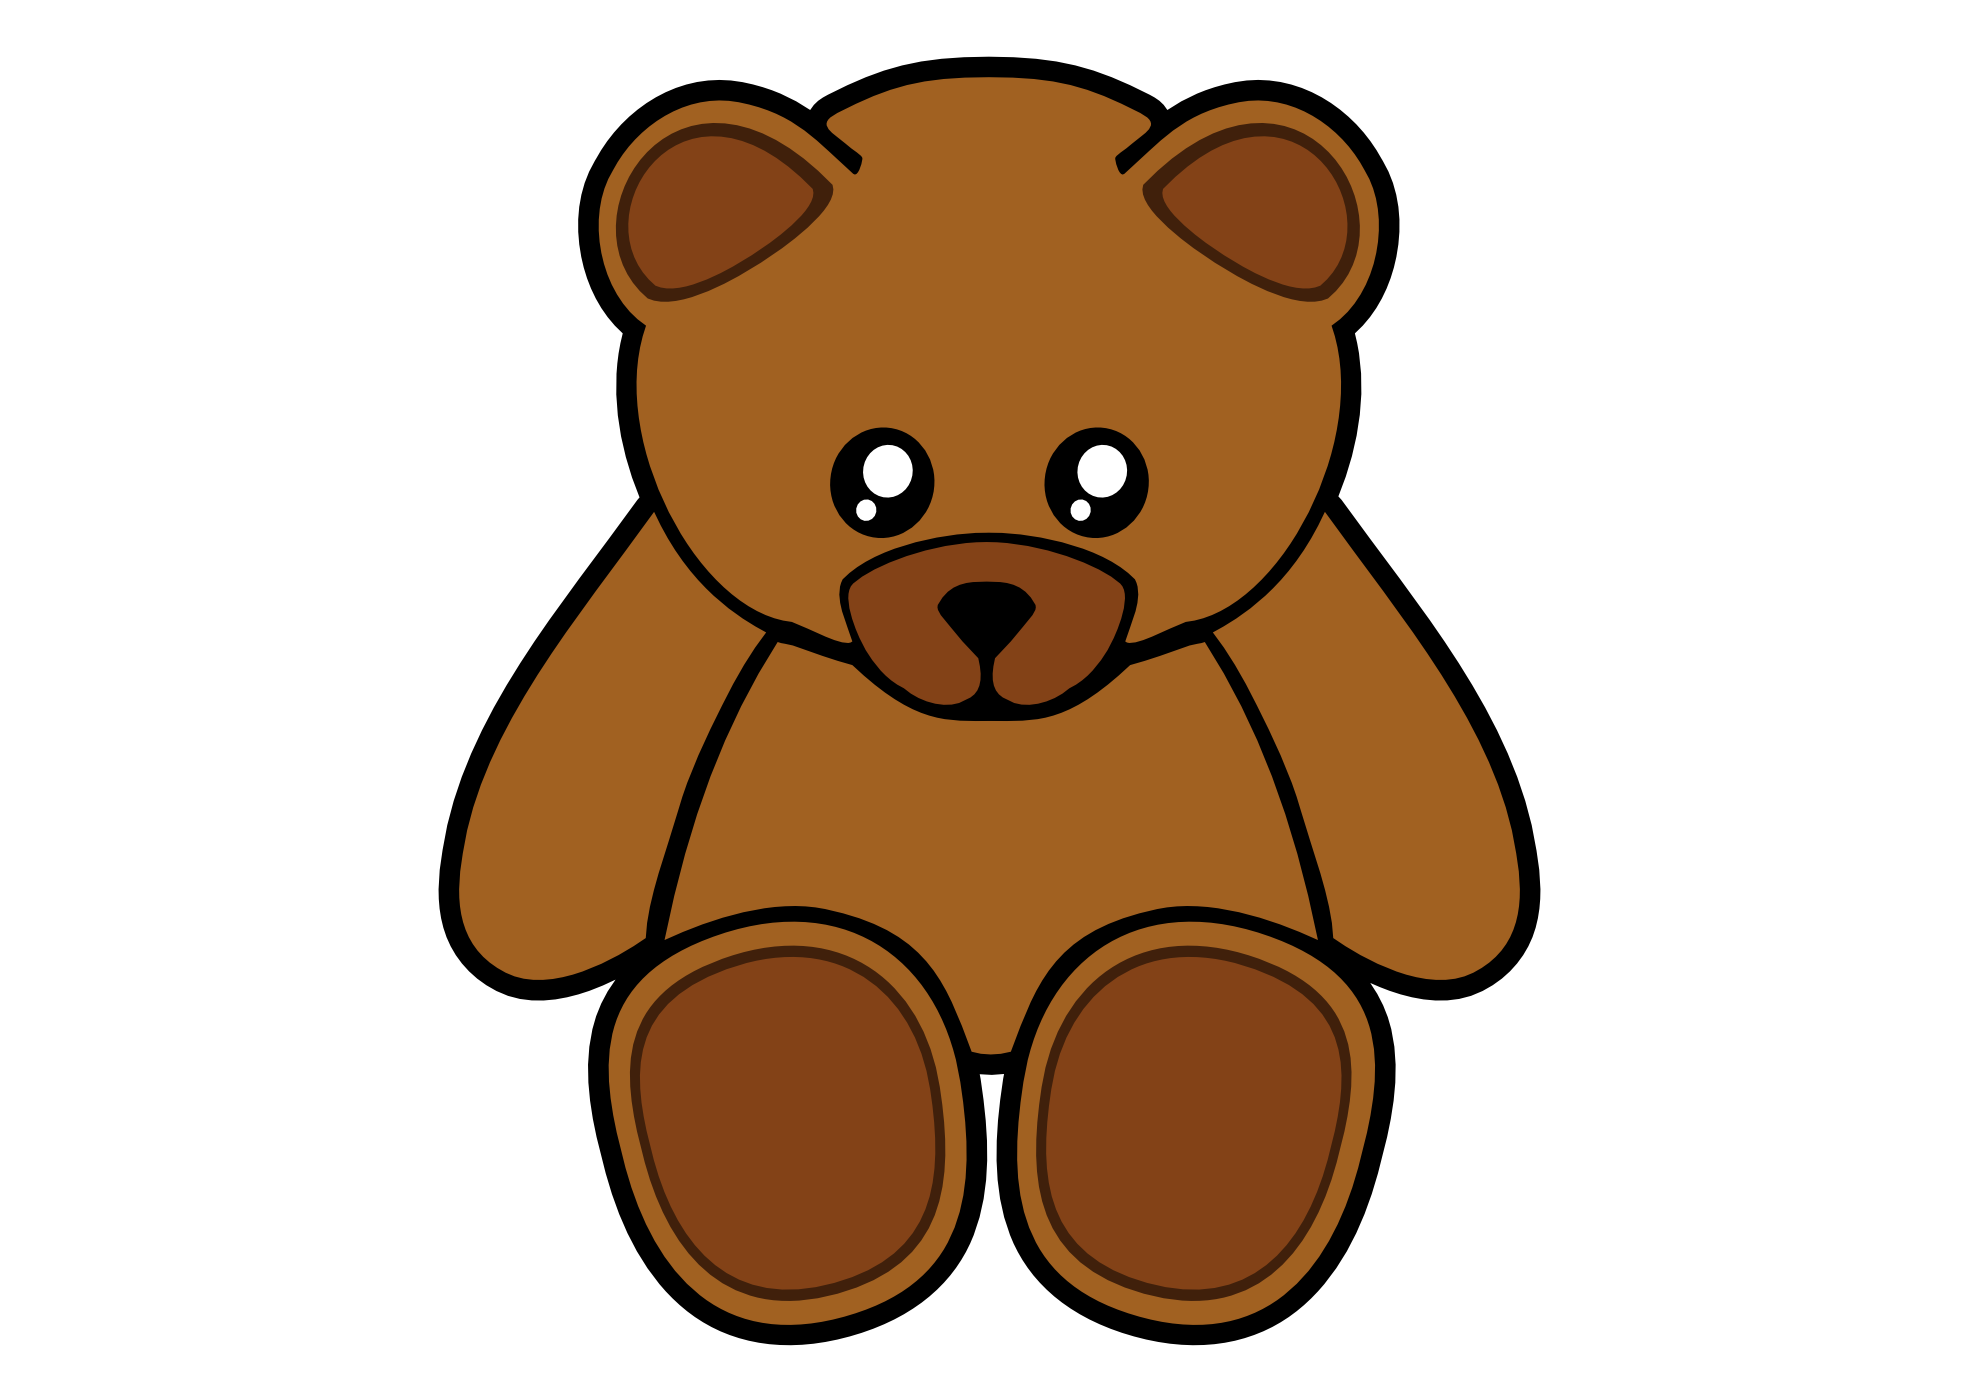 Cute Grizzly Bear Clip Art | Clipart Panda - Free Clipart Images